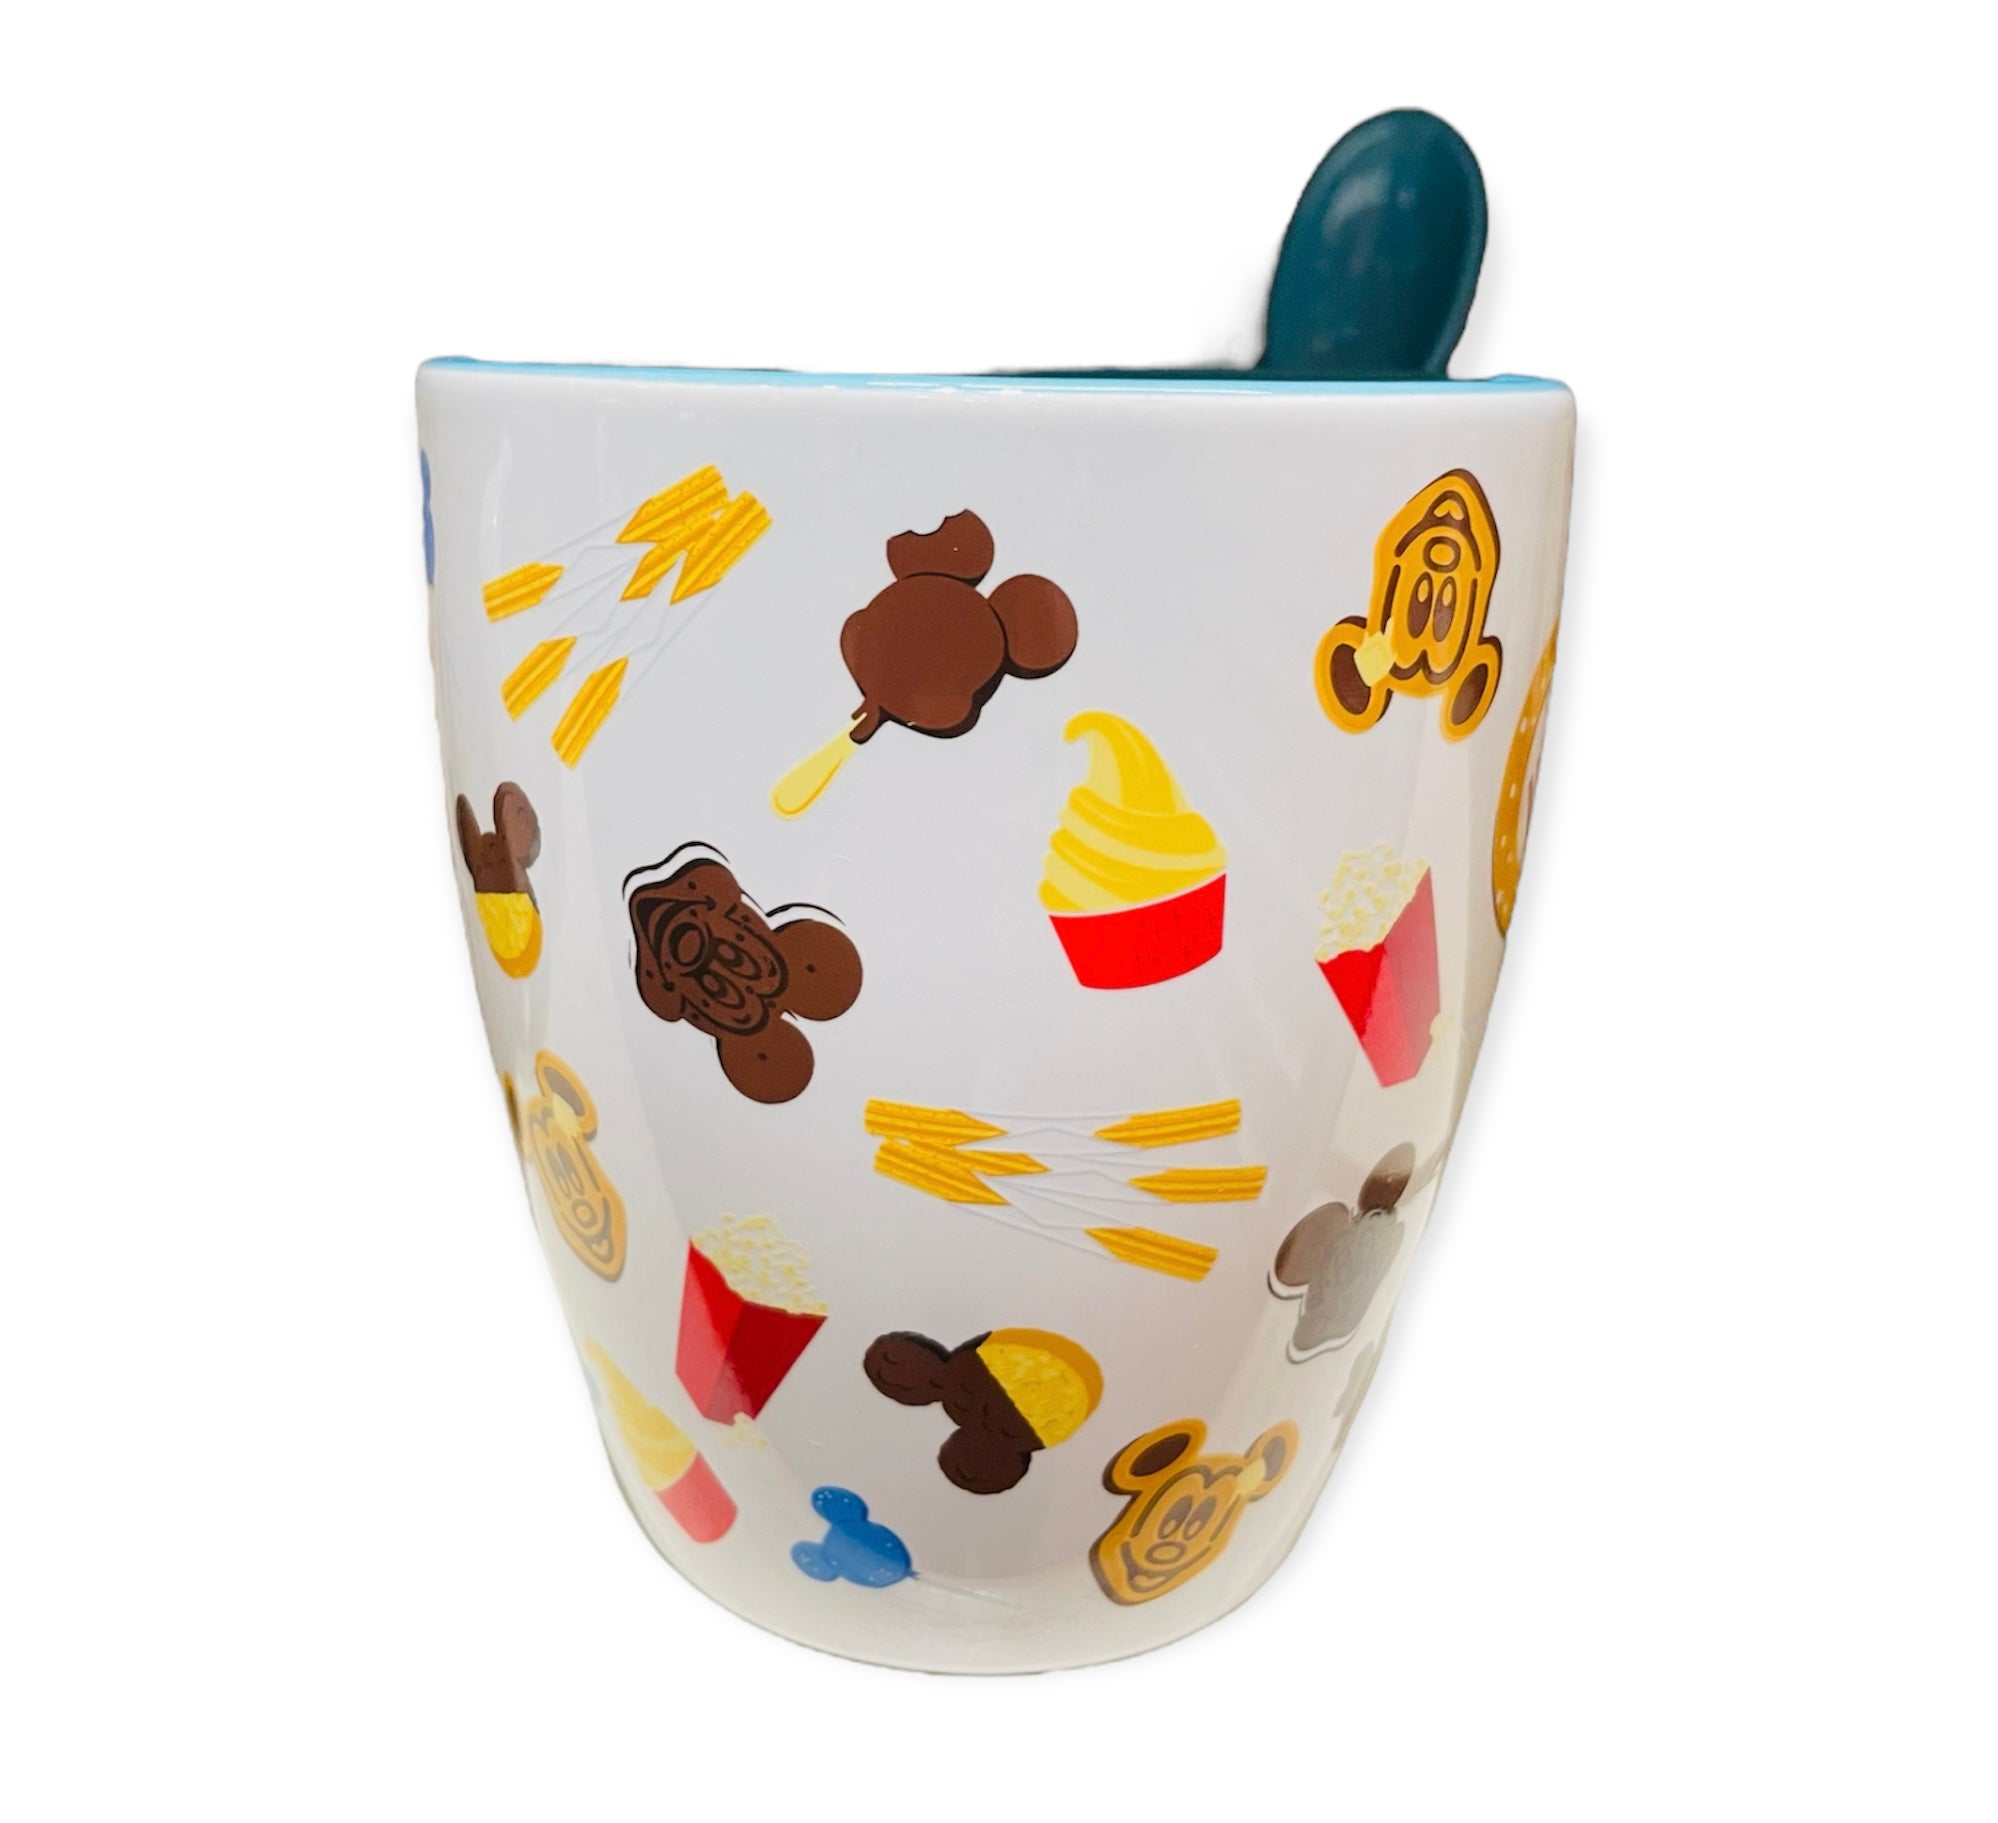 Disney Parks “I’m Just Here for the Snacks” Mug with Spoon